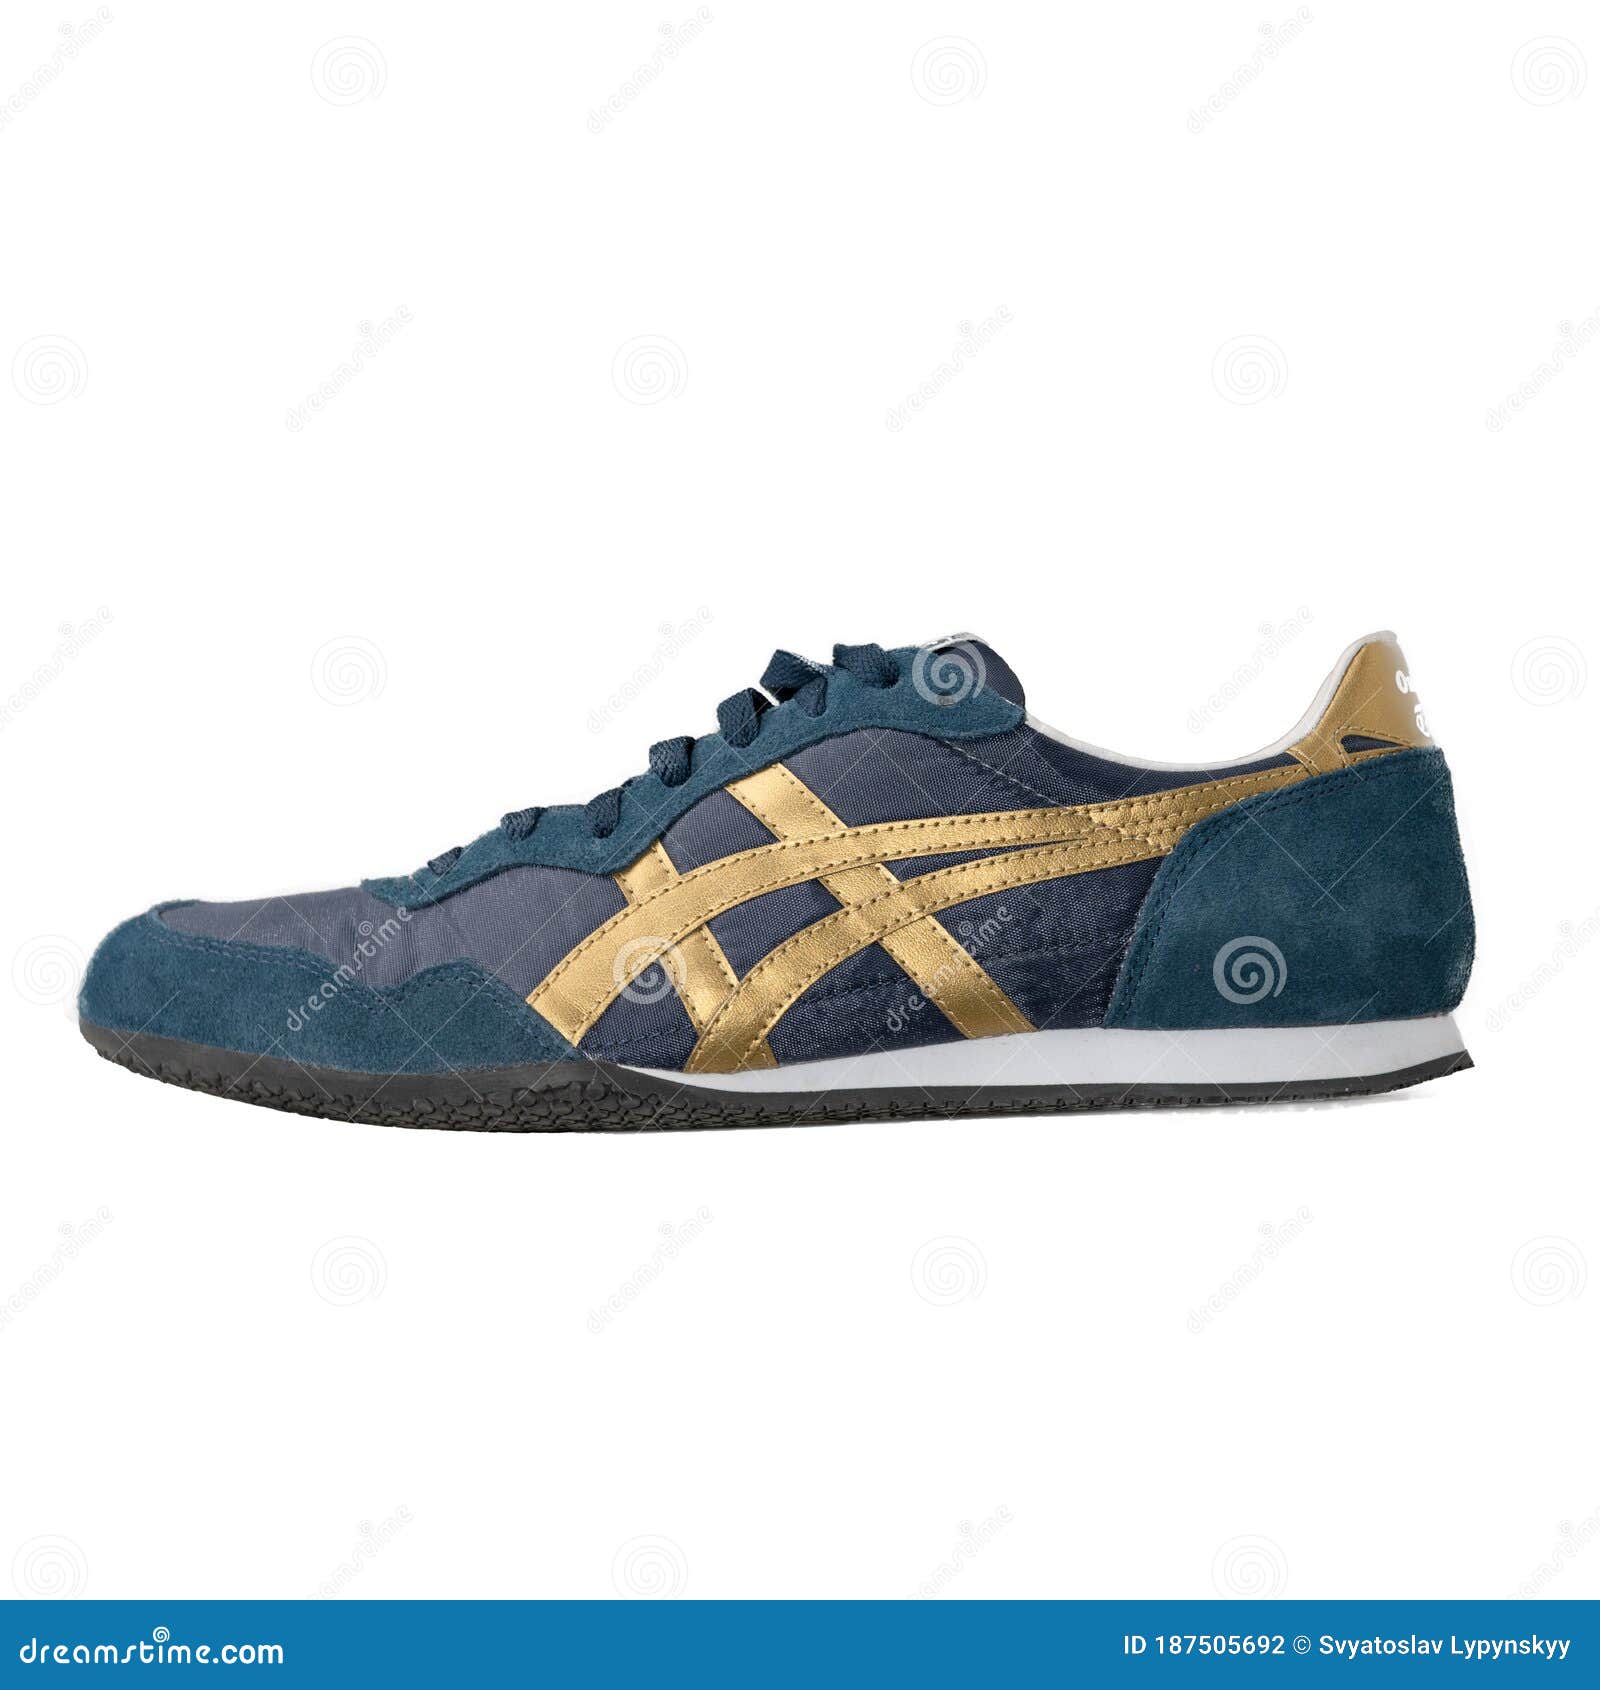 Blue Asics Brand Sneakers with Laces and Gold Accents on on White  Background. Onitsuka Tiger Brand Editorial Photography - Image of classic,  lifestyle: 187505692